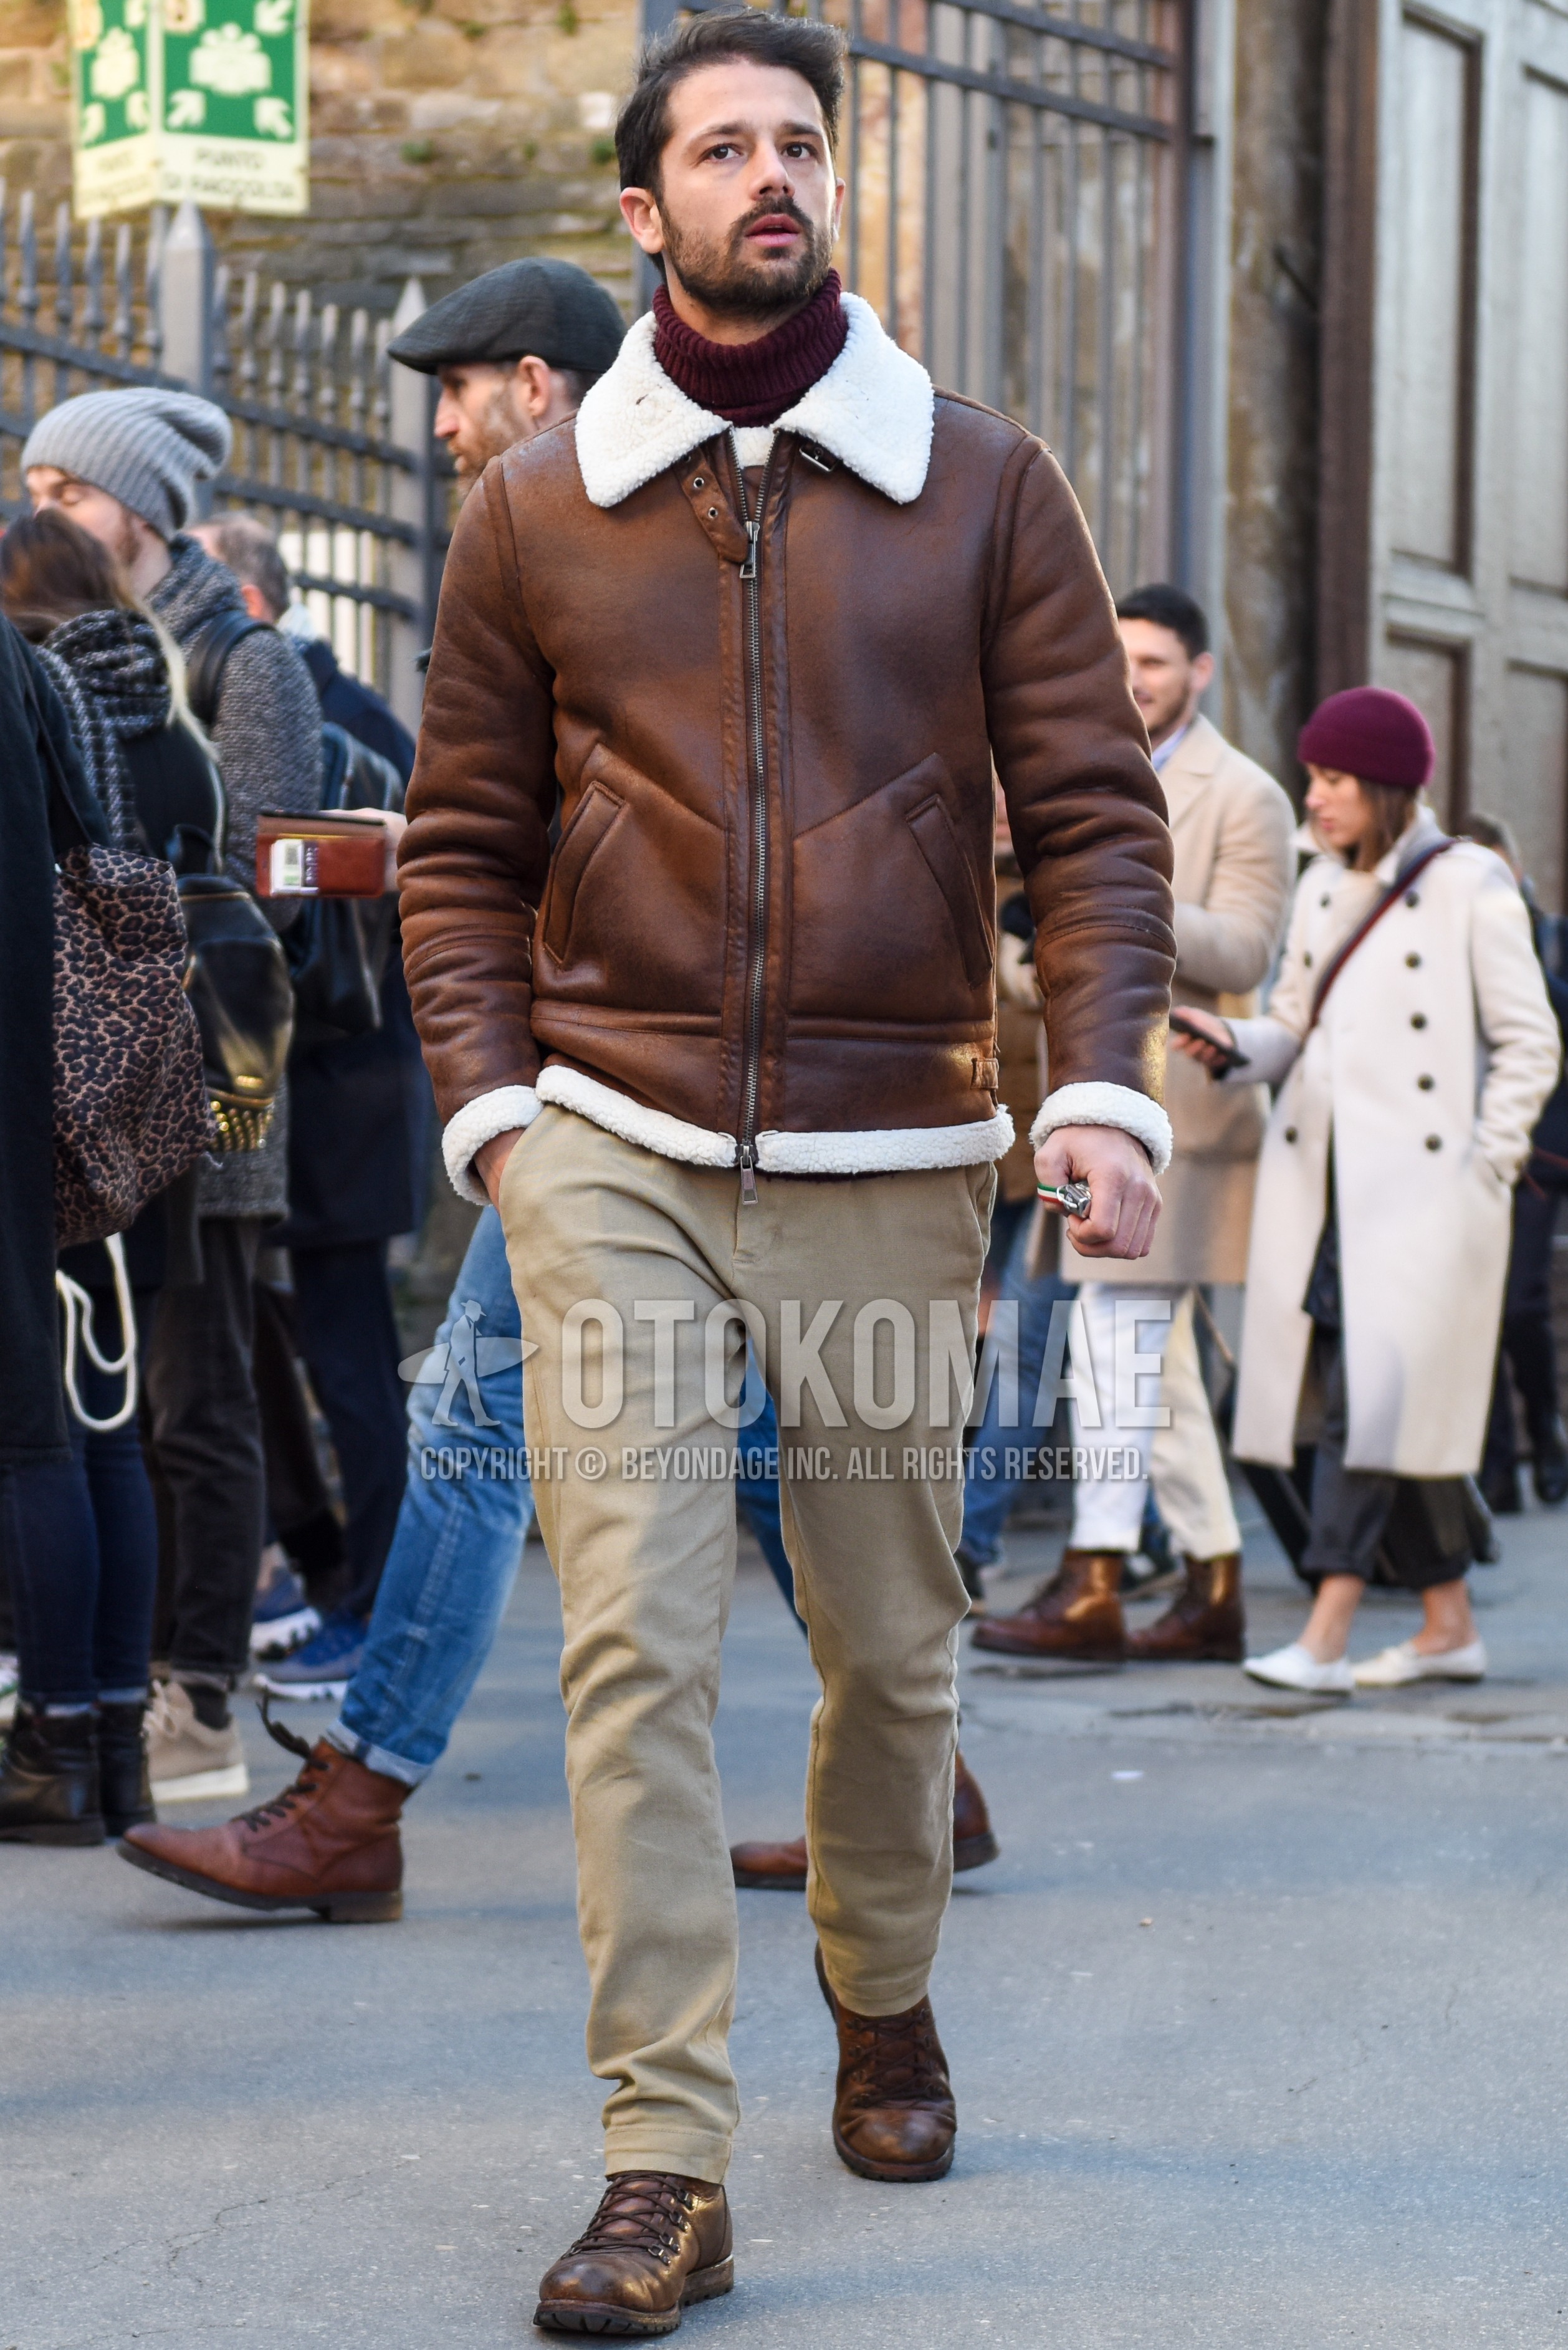 Men's autumn winter outfit with brown plain leather jacket, brown plain military jacket, brown plain turtleneck knit, beige plain chinos, brown  boots.